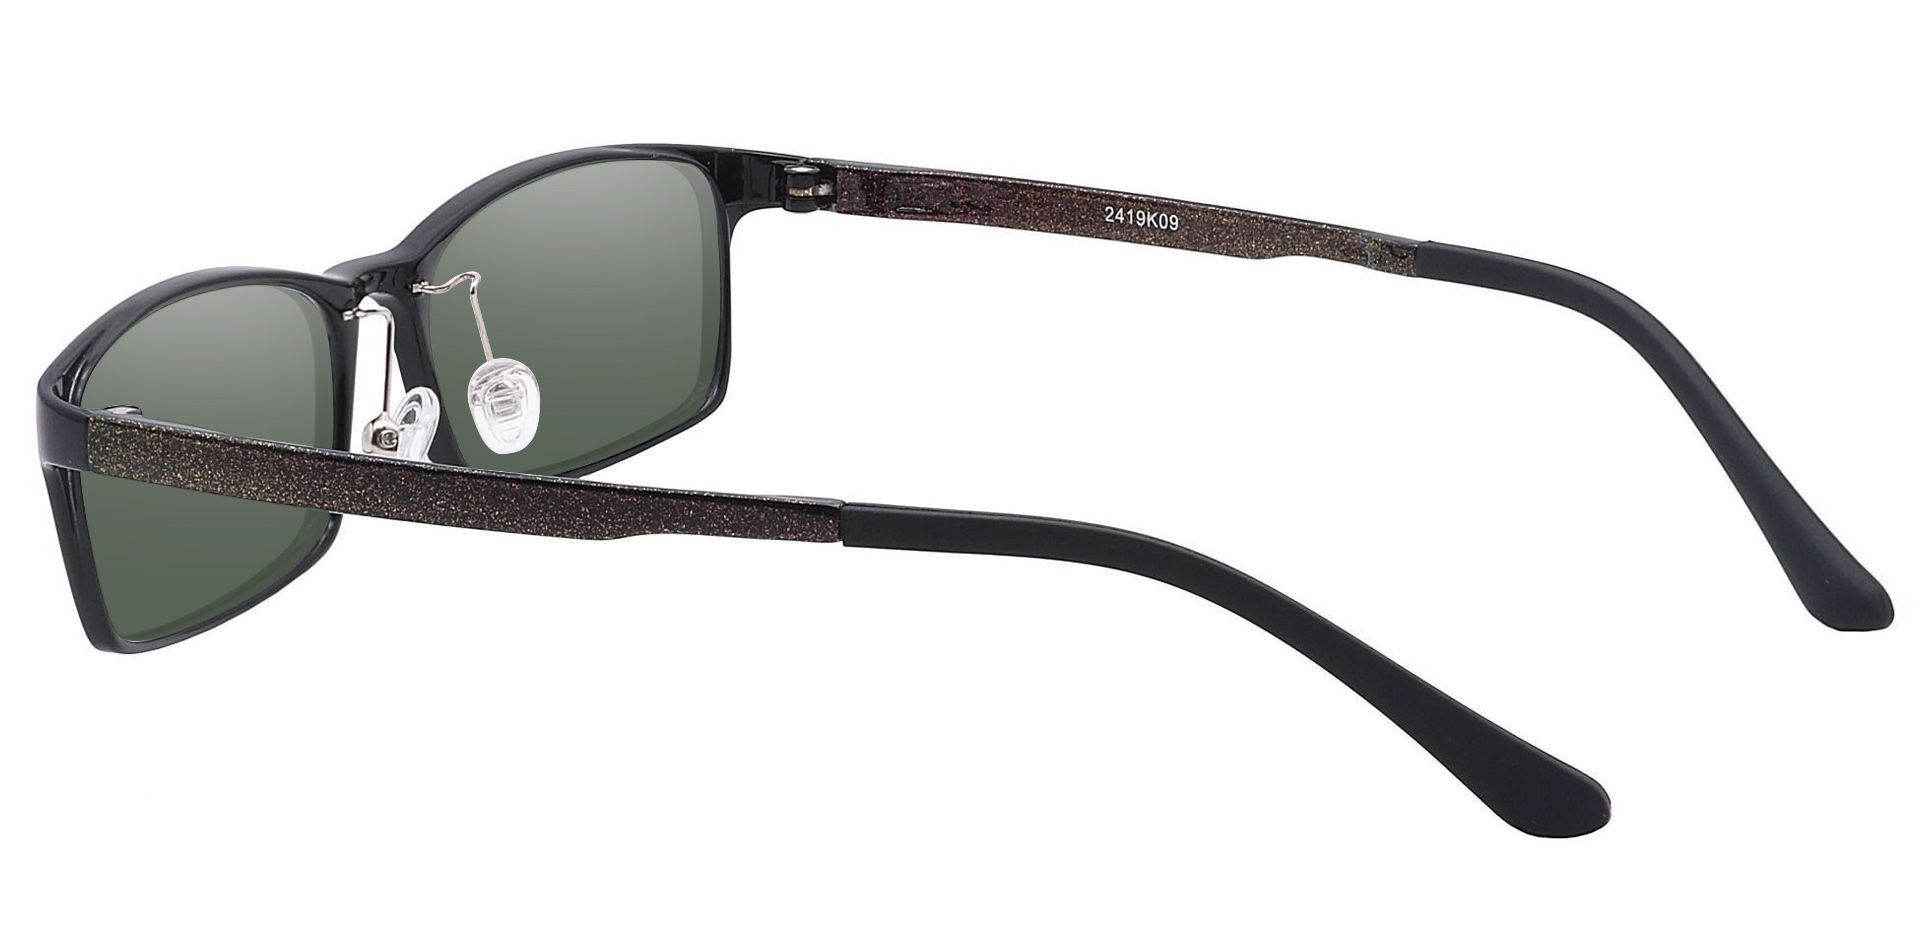 Hydra Rectangle Non-Rx Sunglasses - Black Frame With Green Lenses